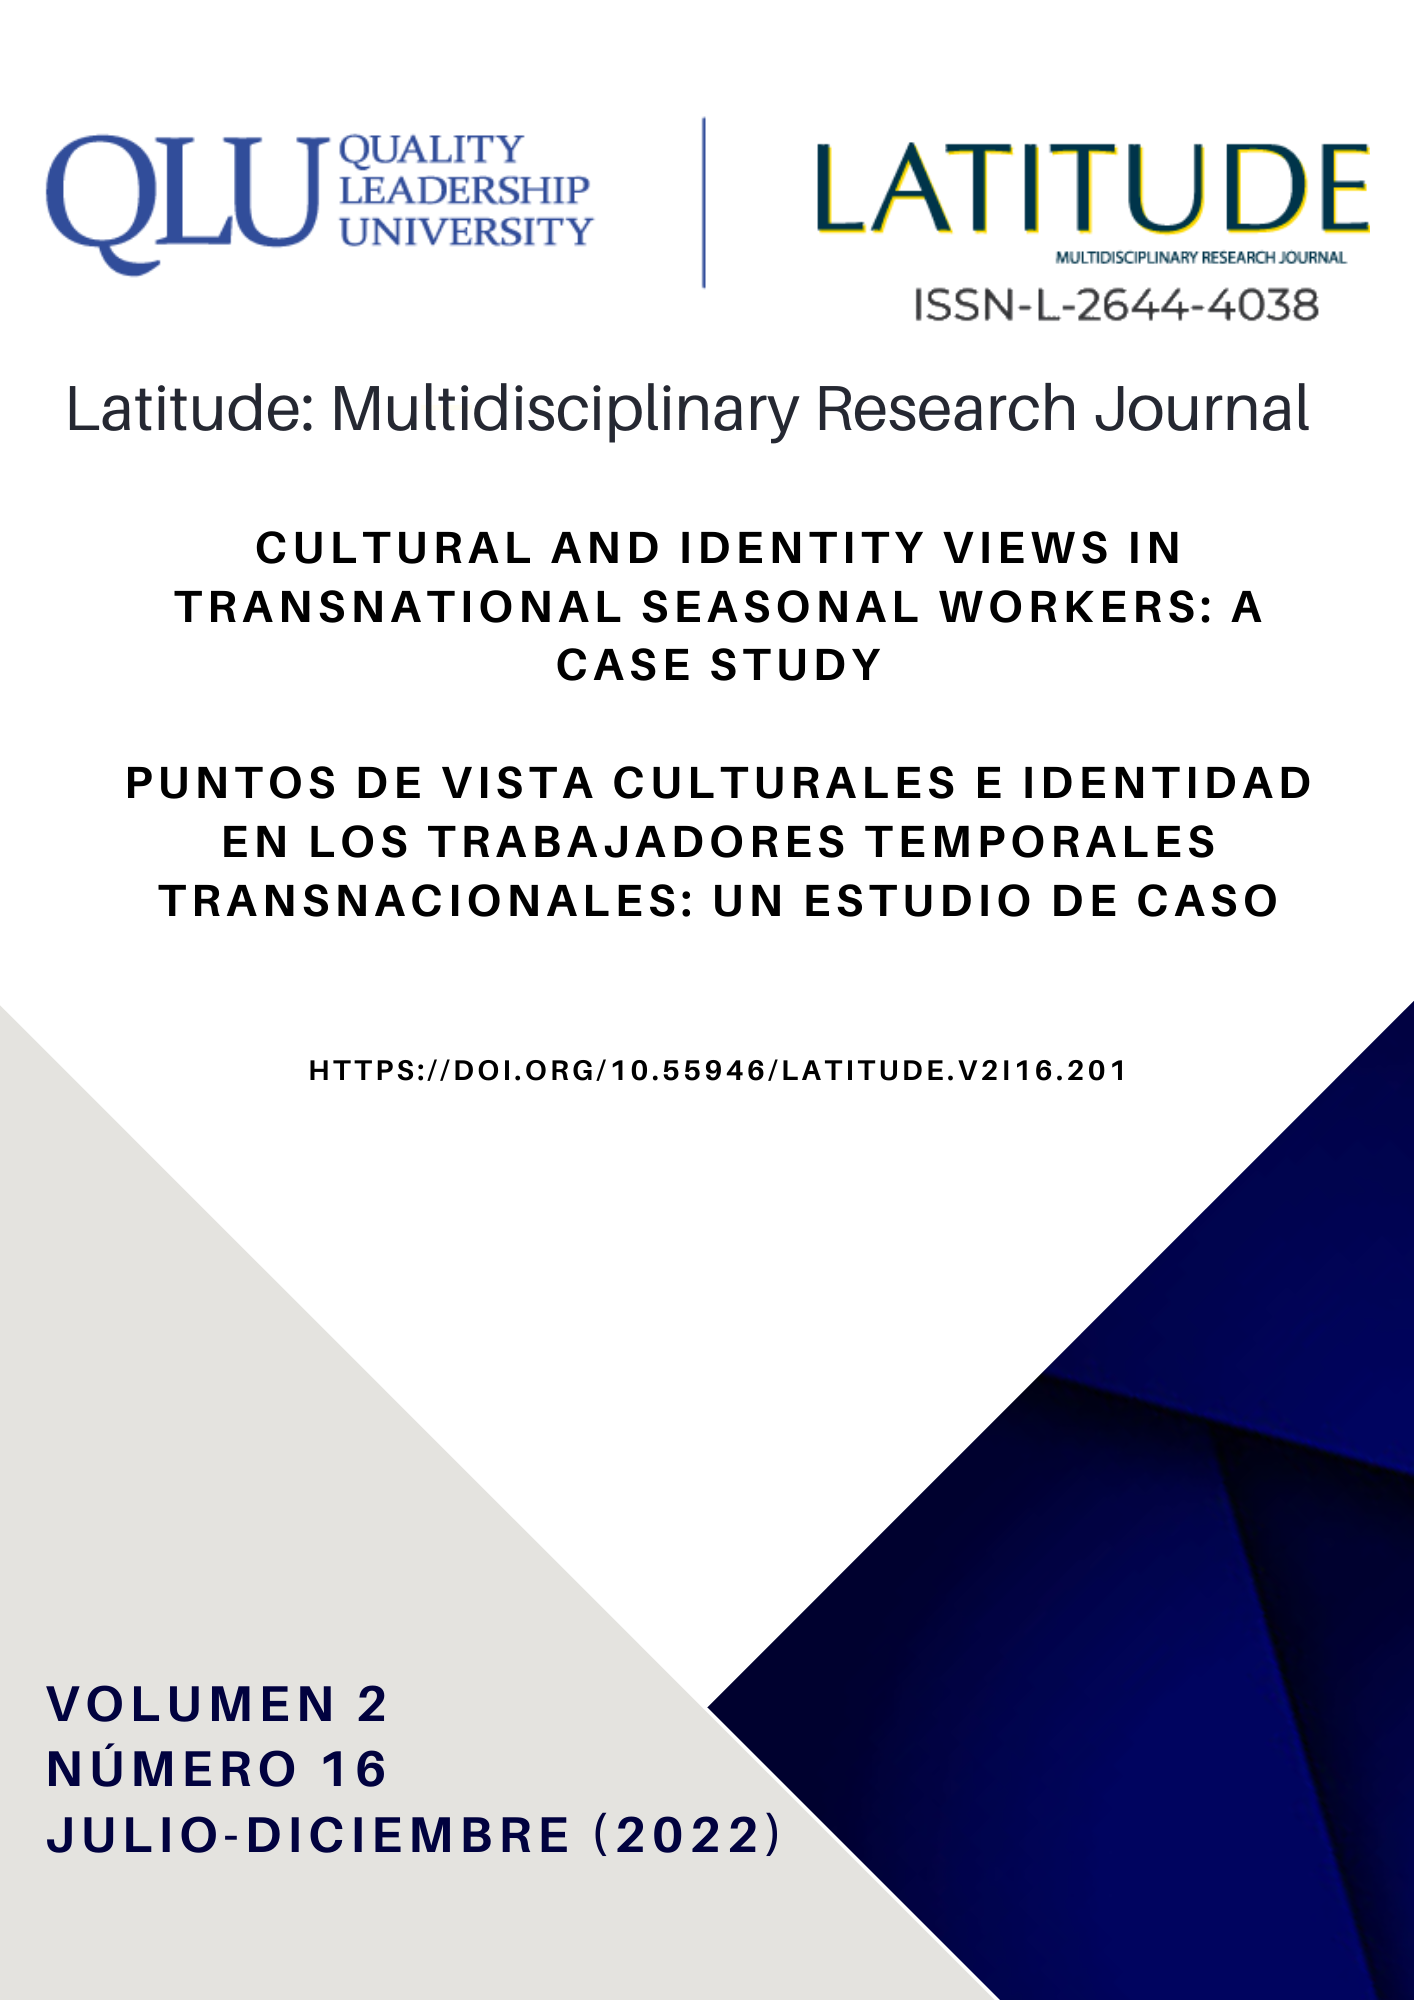 CULTURAL AND IDENTITY VIEWS IN TRANSNATIONAL SEASONAL WORKERS: A CASE STUDY